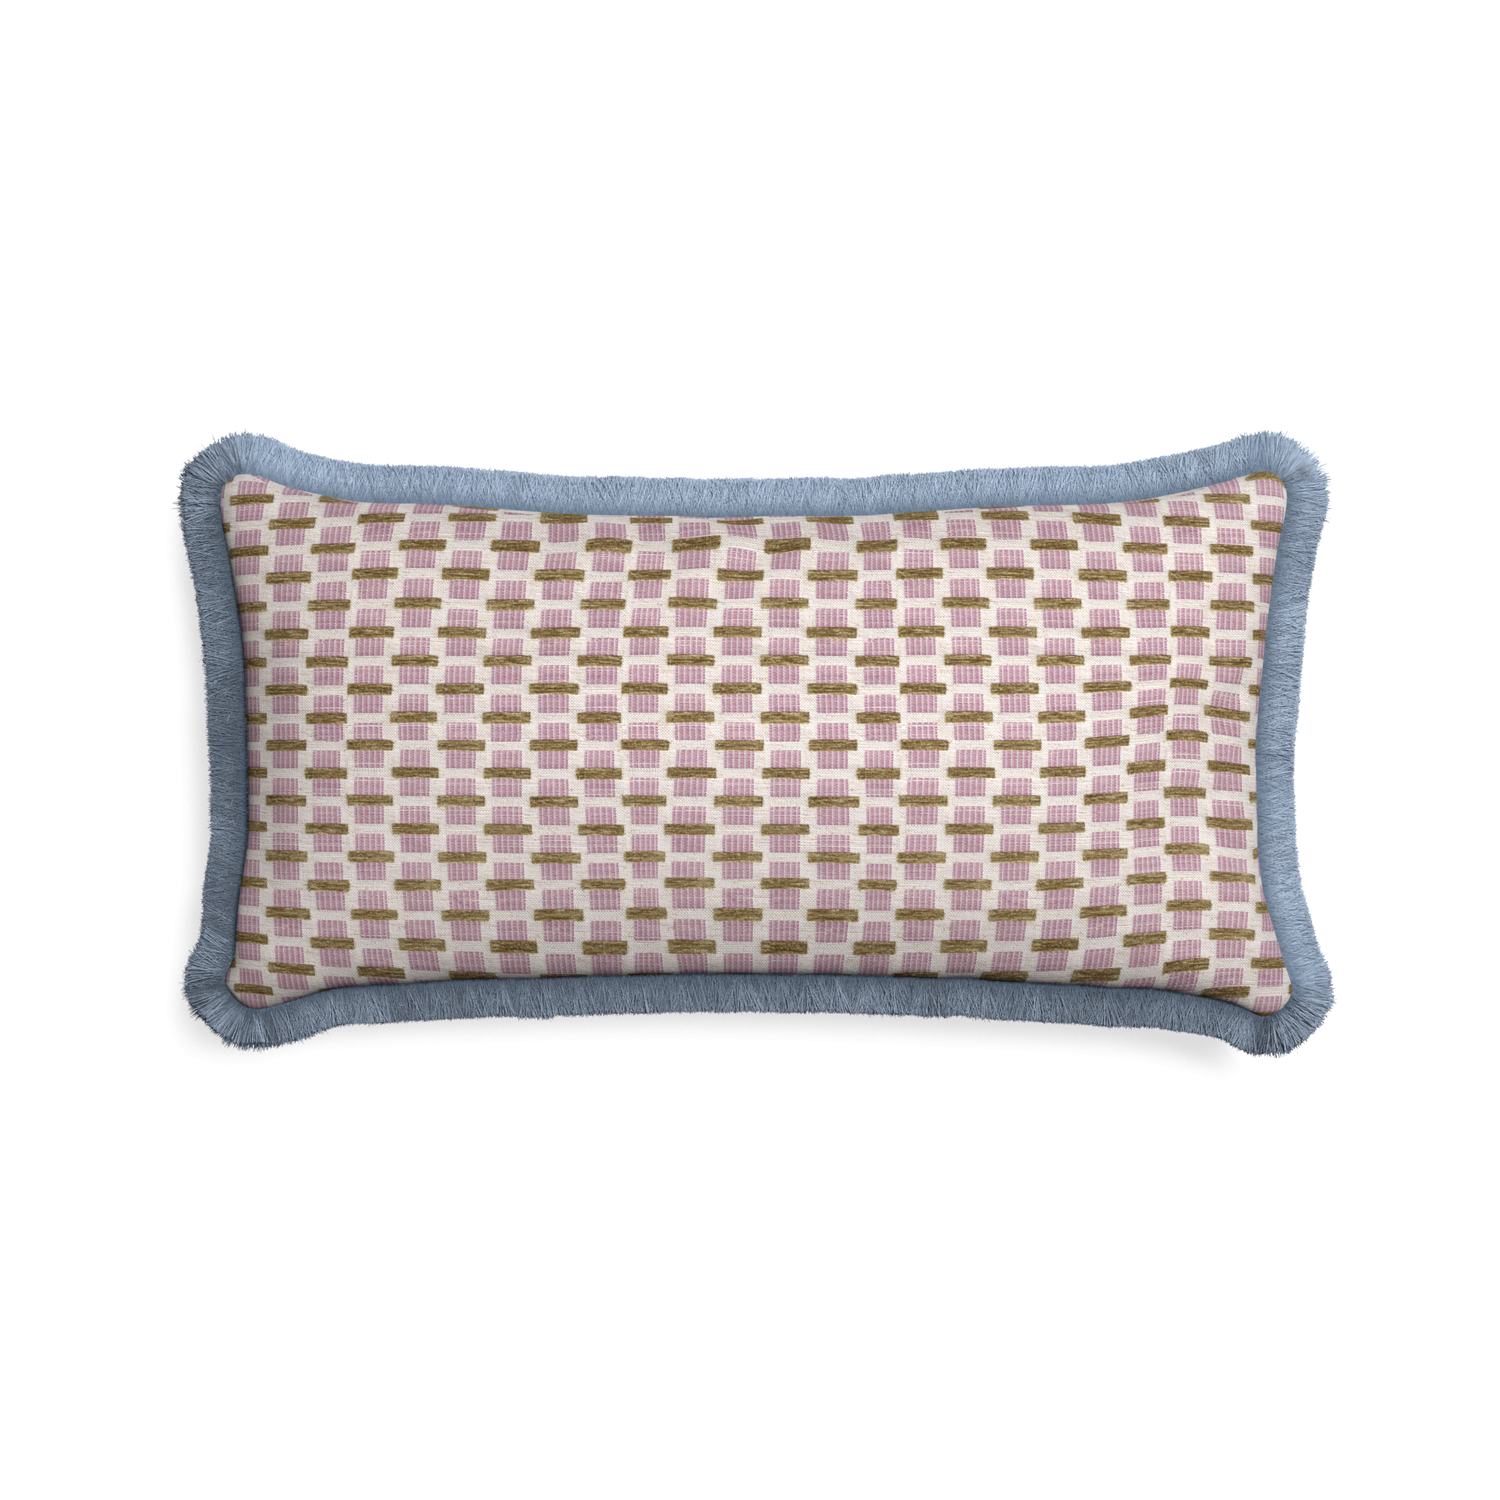 Midi-lumbar willow orchid custom pink geometric chenillepillow with sky fringe on white background